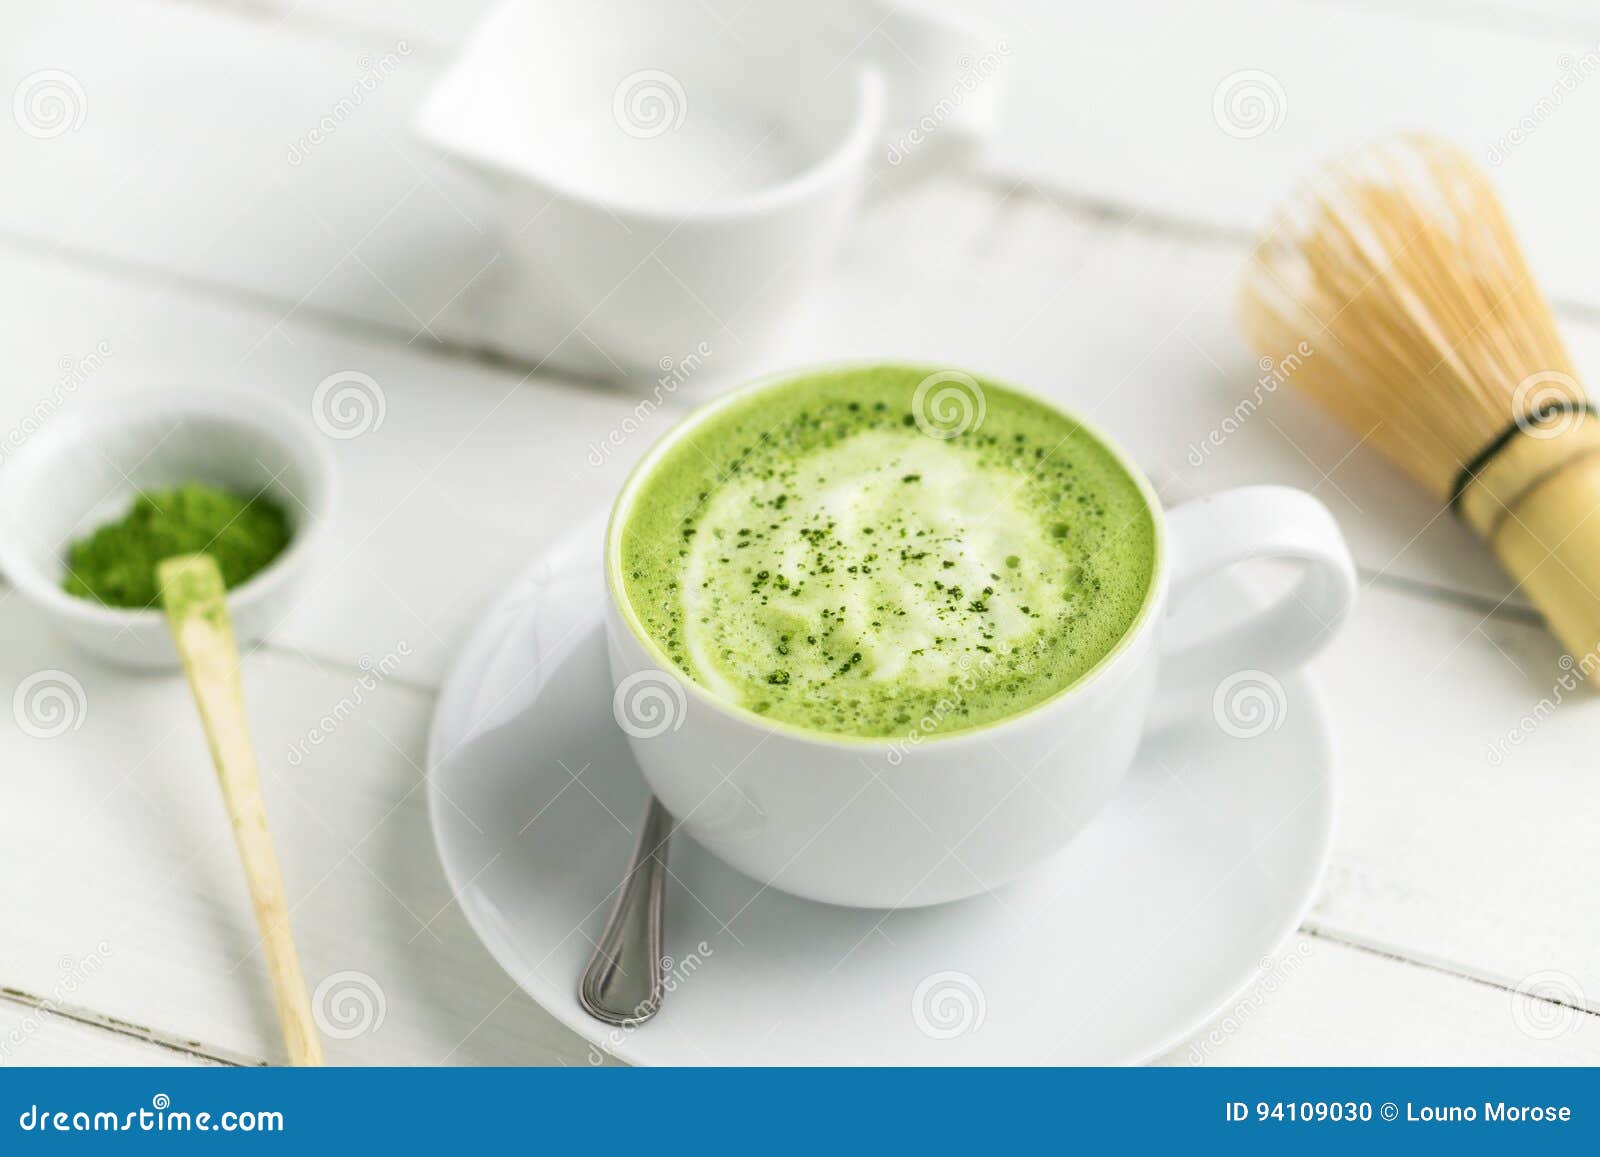 cup of matcha green tea latte with accessories in background.